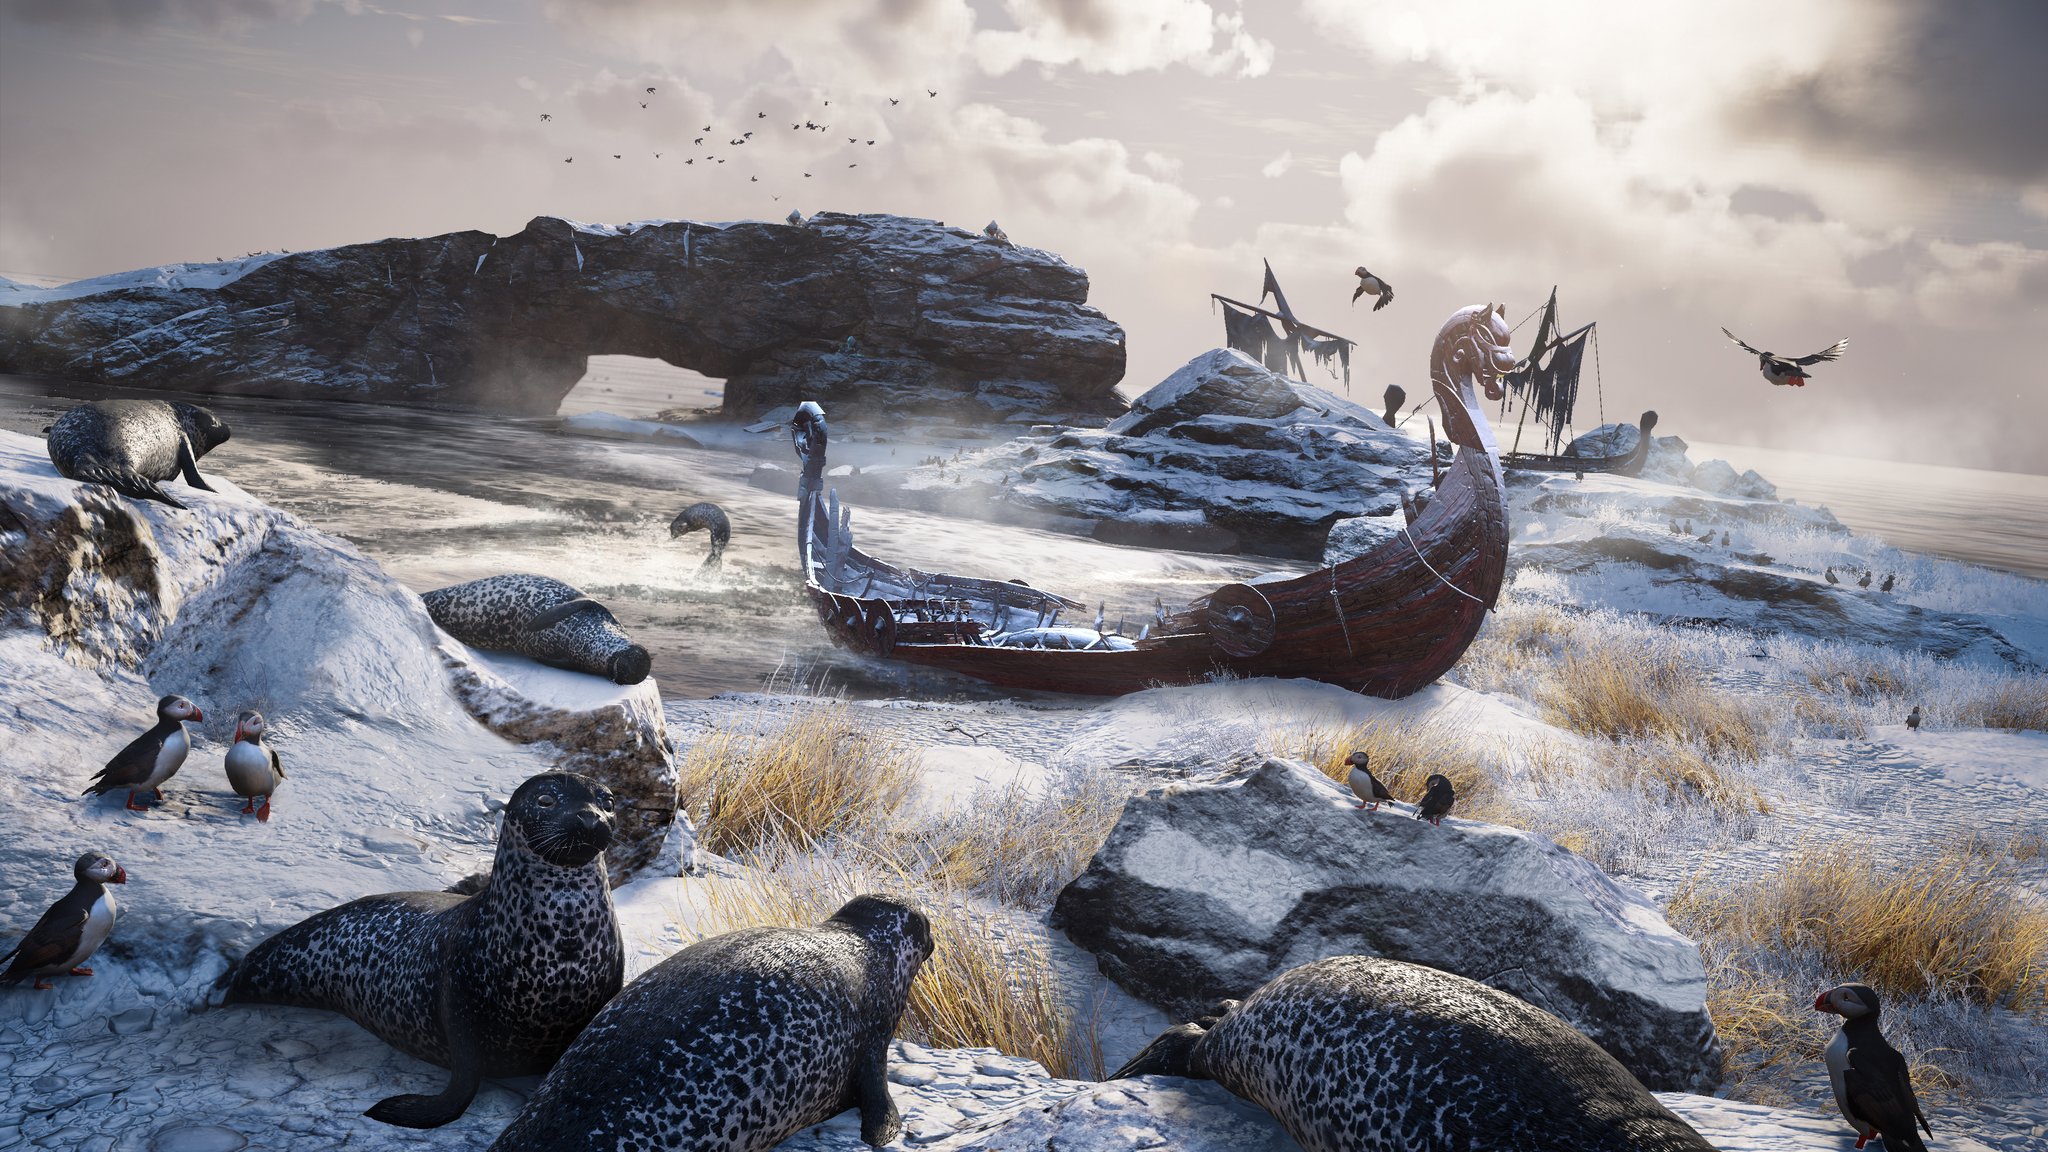 https://www.windowscentral.com/sites/wpcentral.com/files/styles/larger/public/field/image/2020/10/assassins-creed-valhalla_wildlife_environmental_sealspuffins.jpg